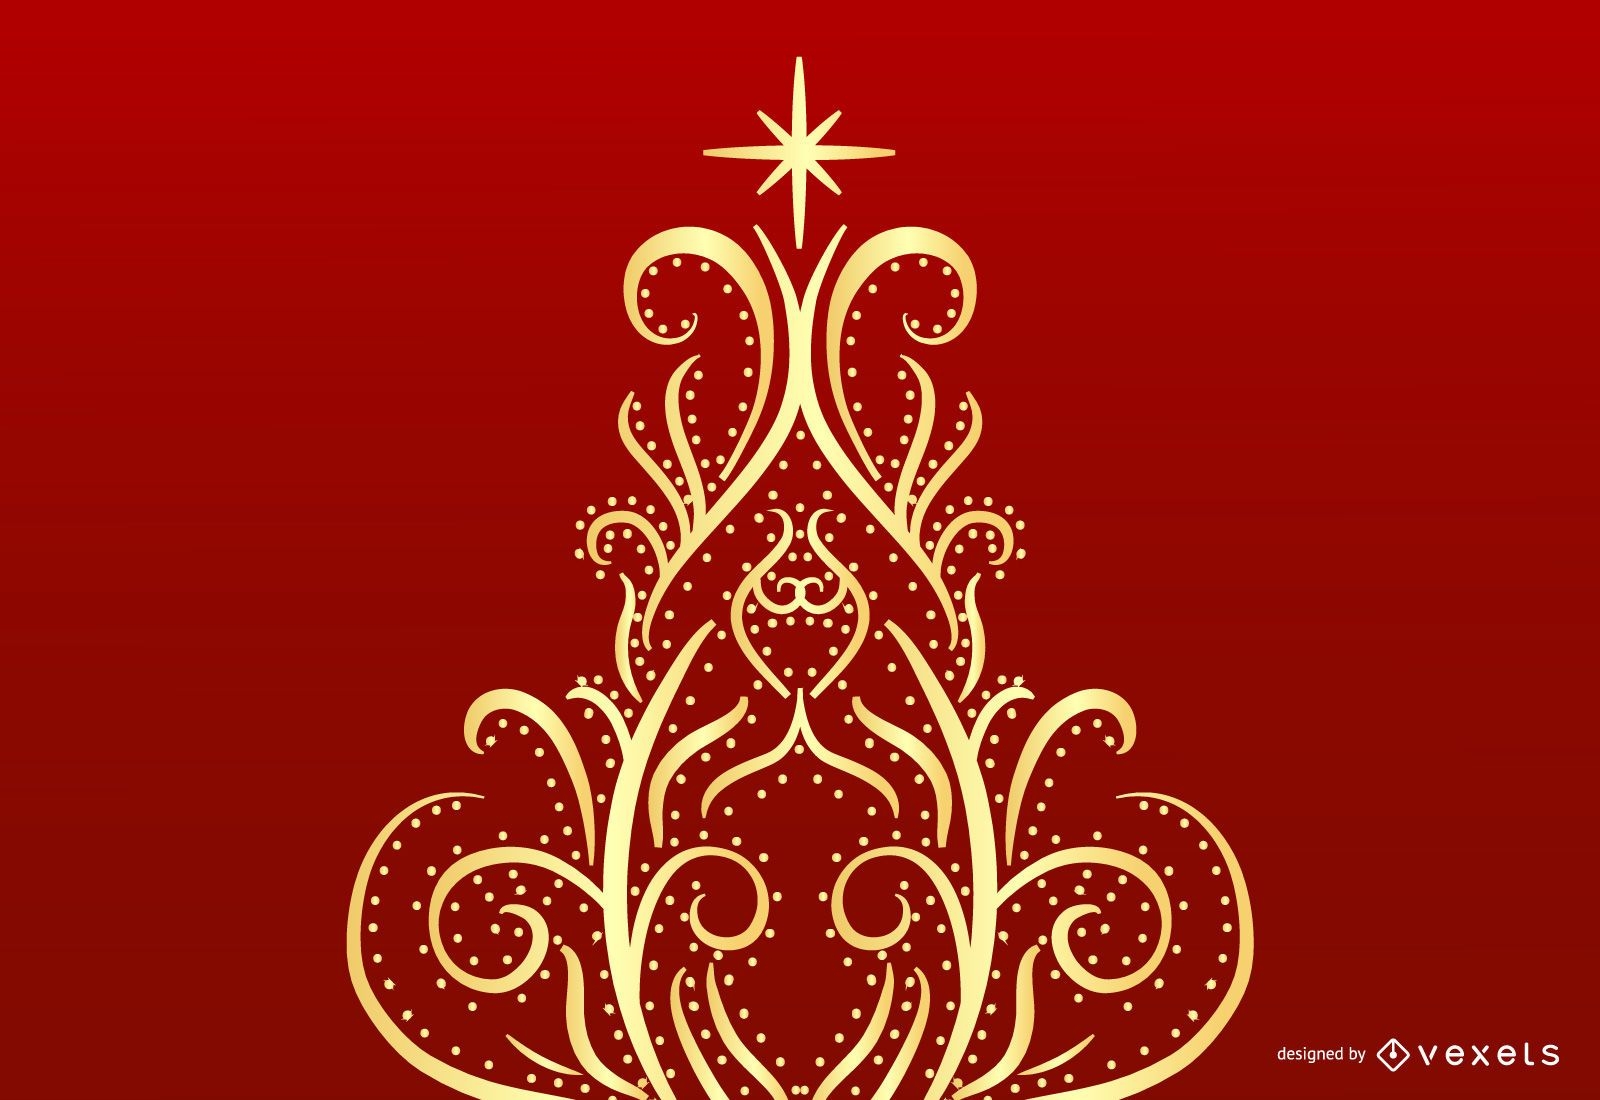 Download Abstract Floral Swirl Christmas Tree Vector Graphic ...